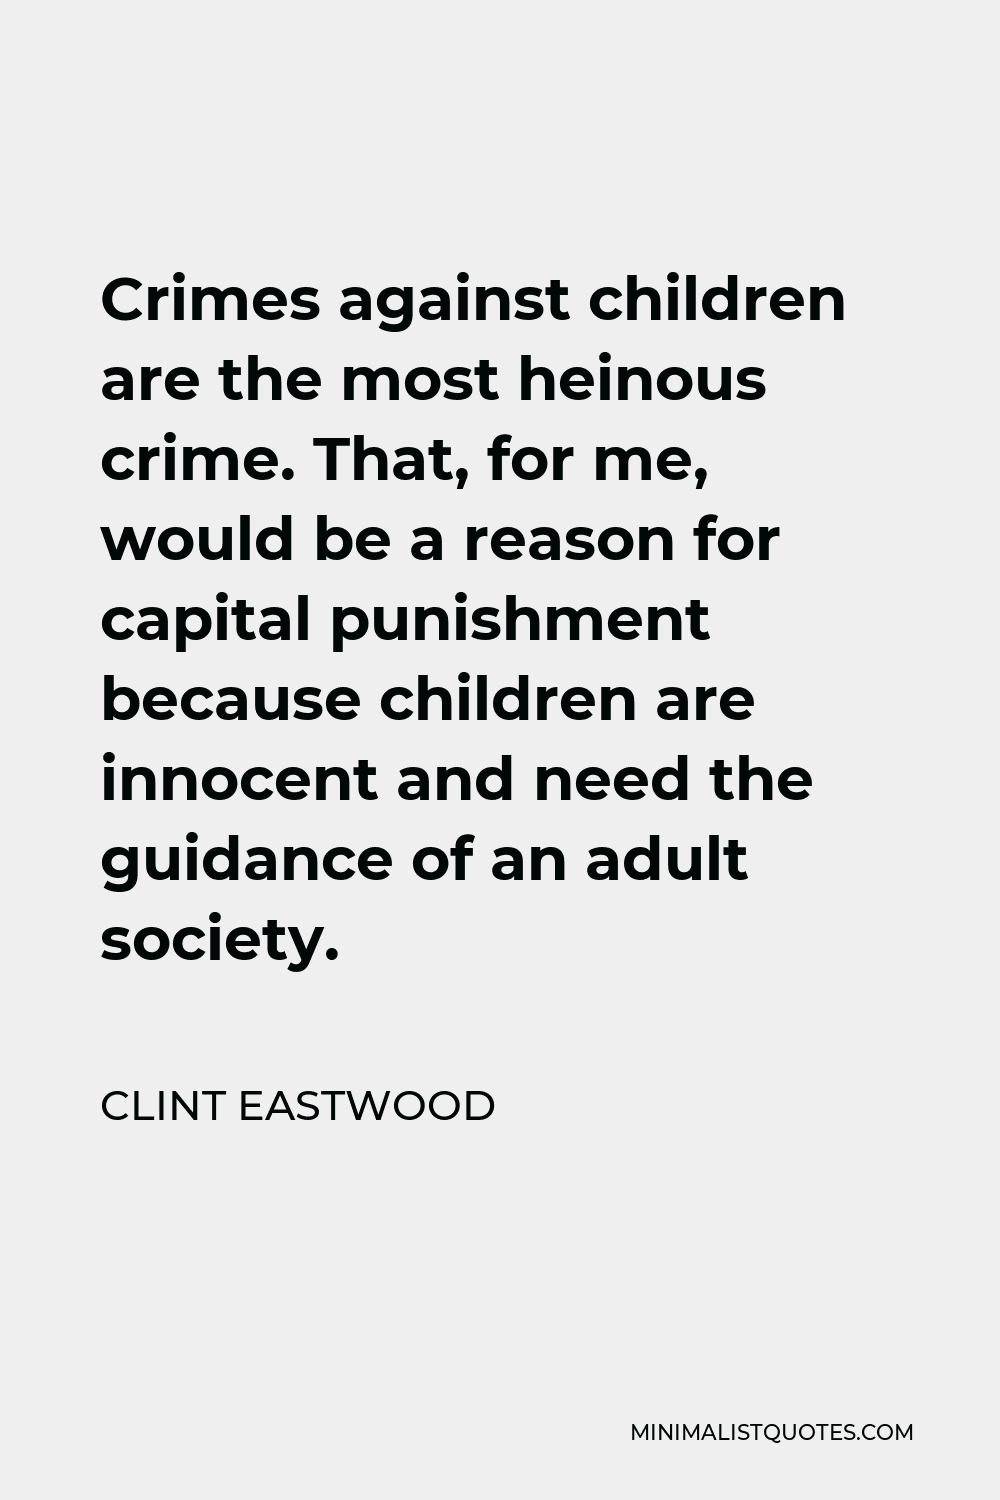 Clint Eastwood Quote - Crimes against children are the most heinous crime. That, for me, would be a reason for capital punishment because children are innocent and need the guidance of an adult society.